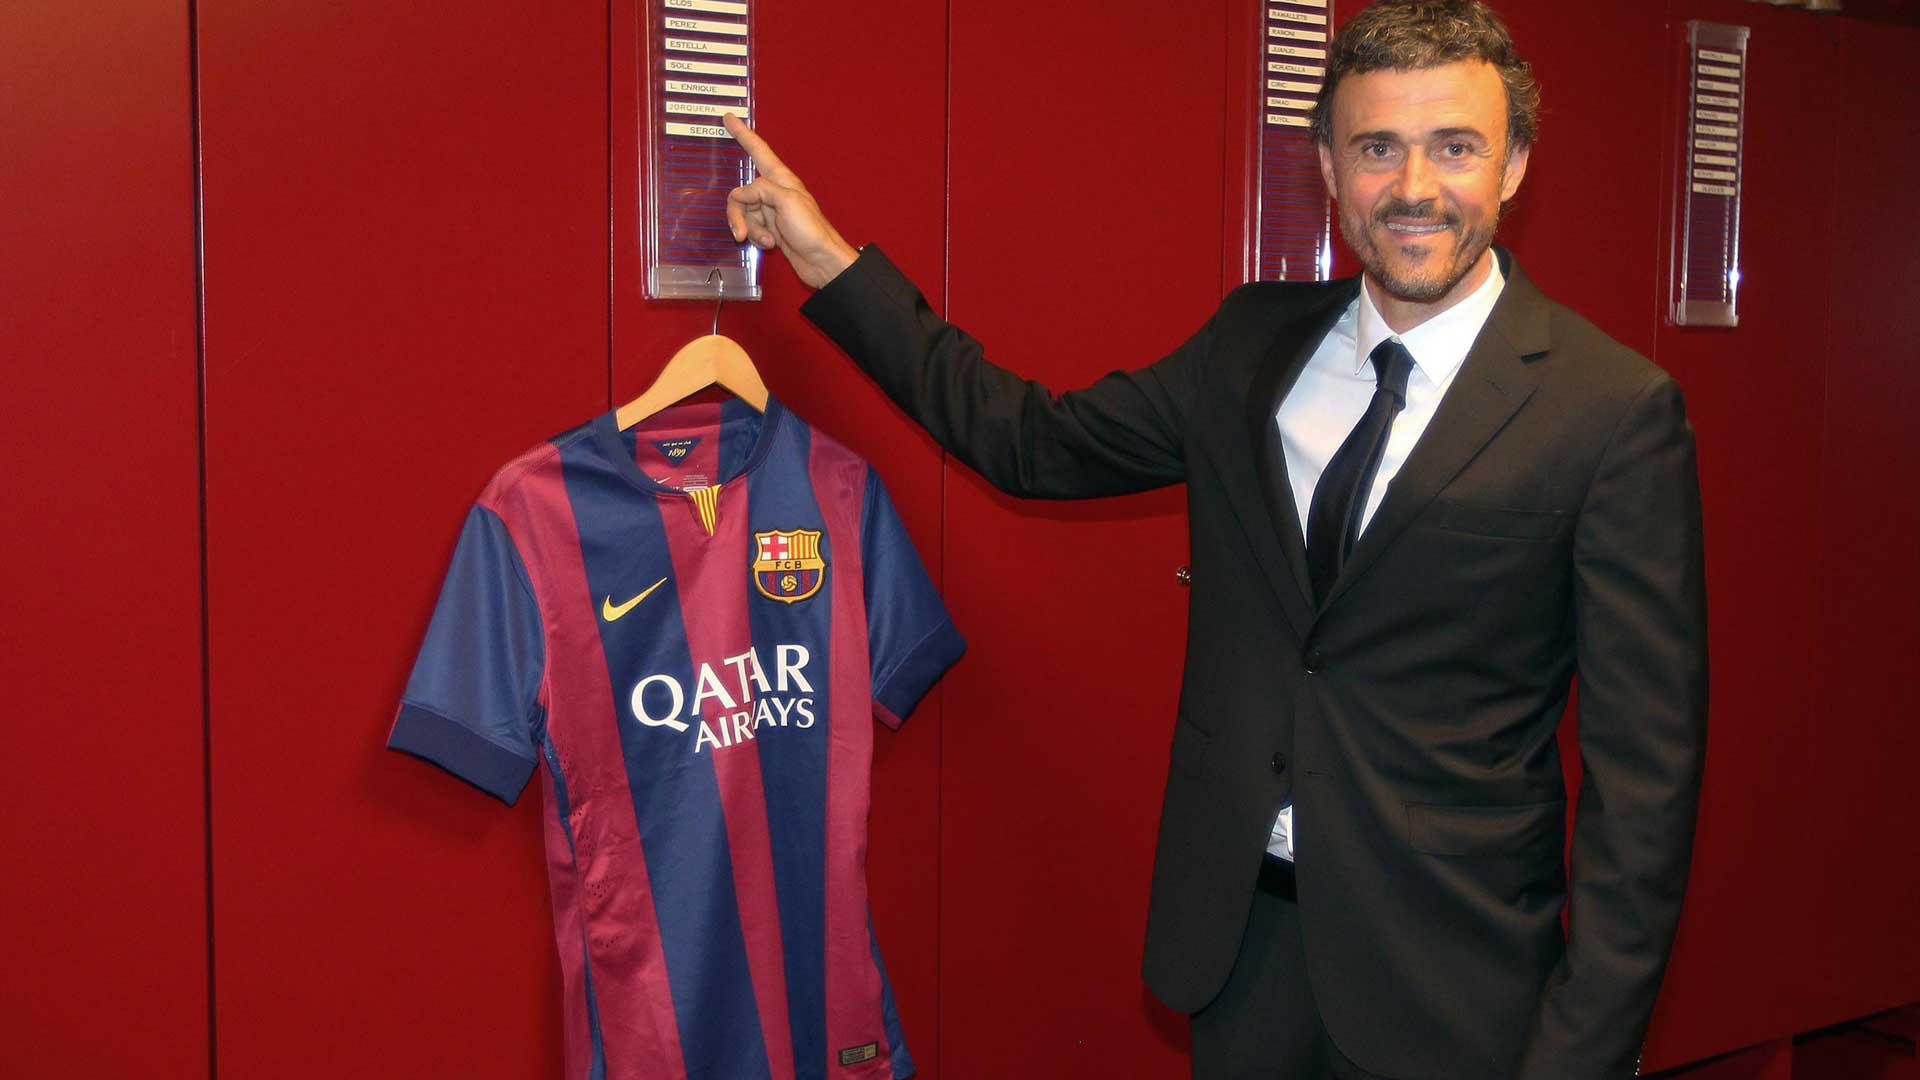 Luis Enrique is excited to see Messi, Neymar and Suarez in action